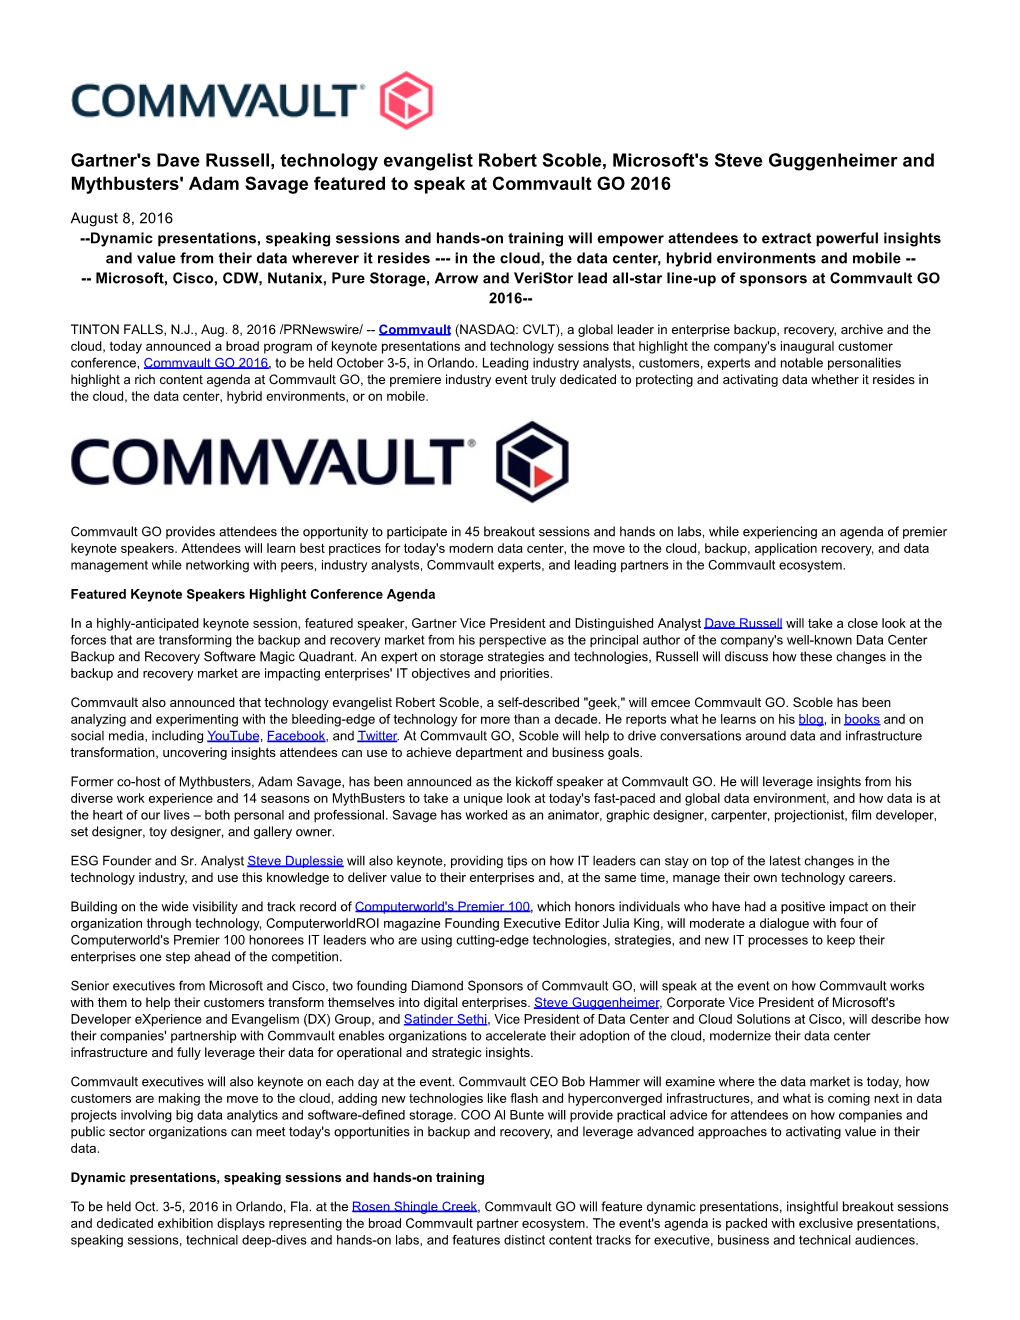 Gartner's Dave Russell, Technology Evangelist Robert Scoble, Microsoft's Steve Guggenheimer and Mythbusters' Adam Savage Featured to Speak at Commvault GO 2016